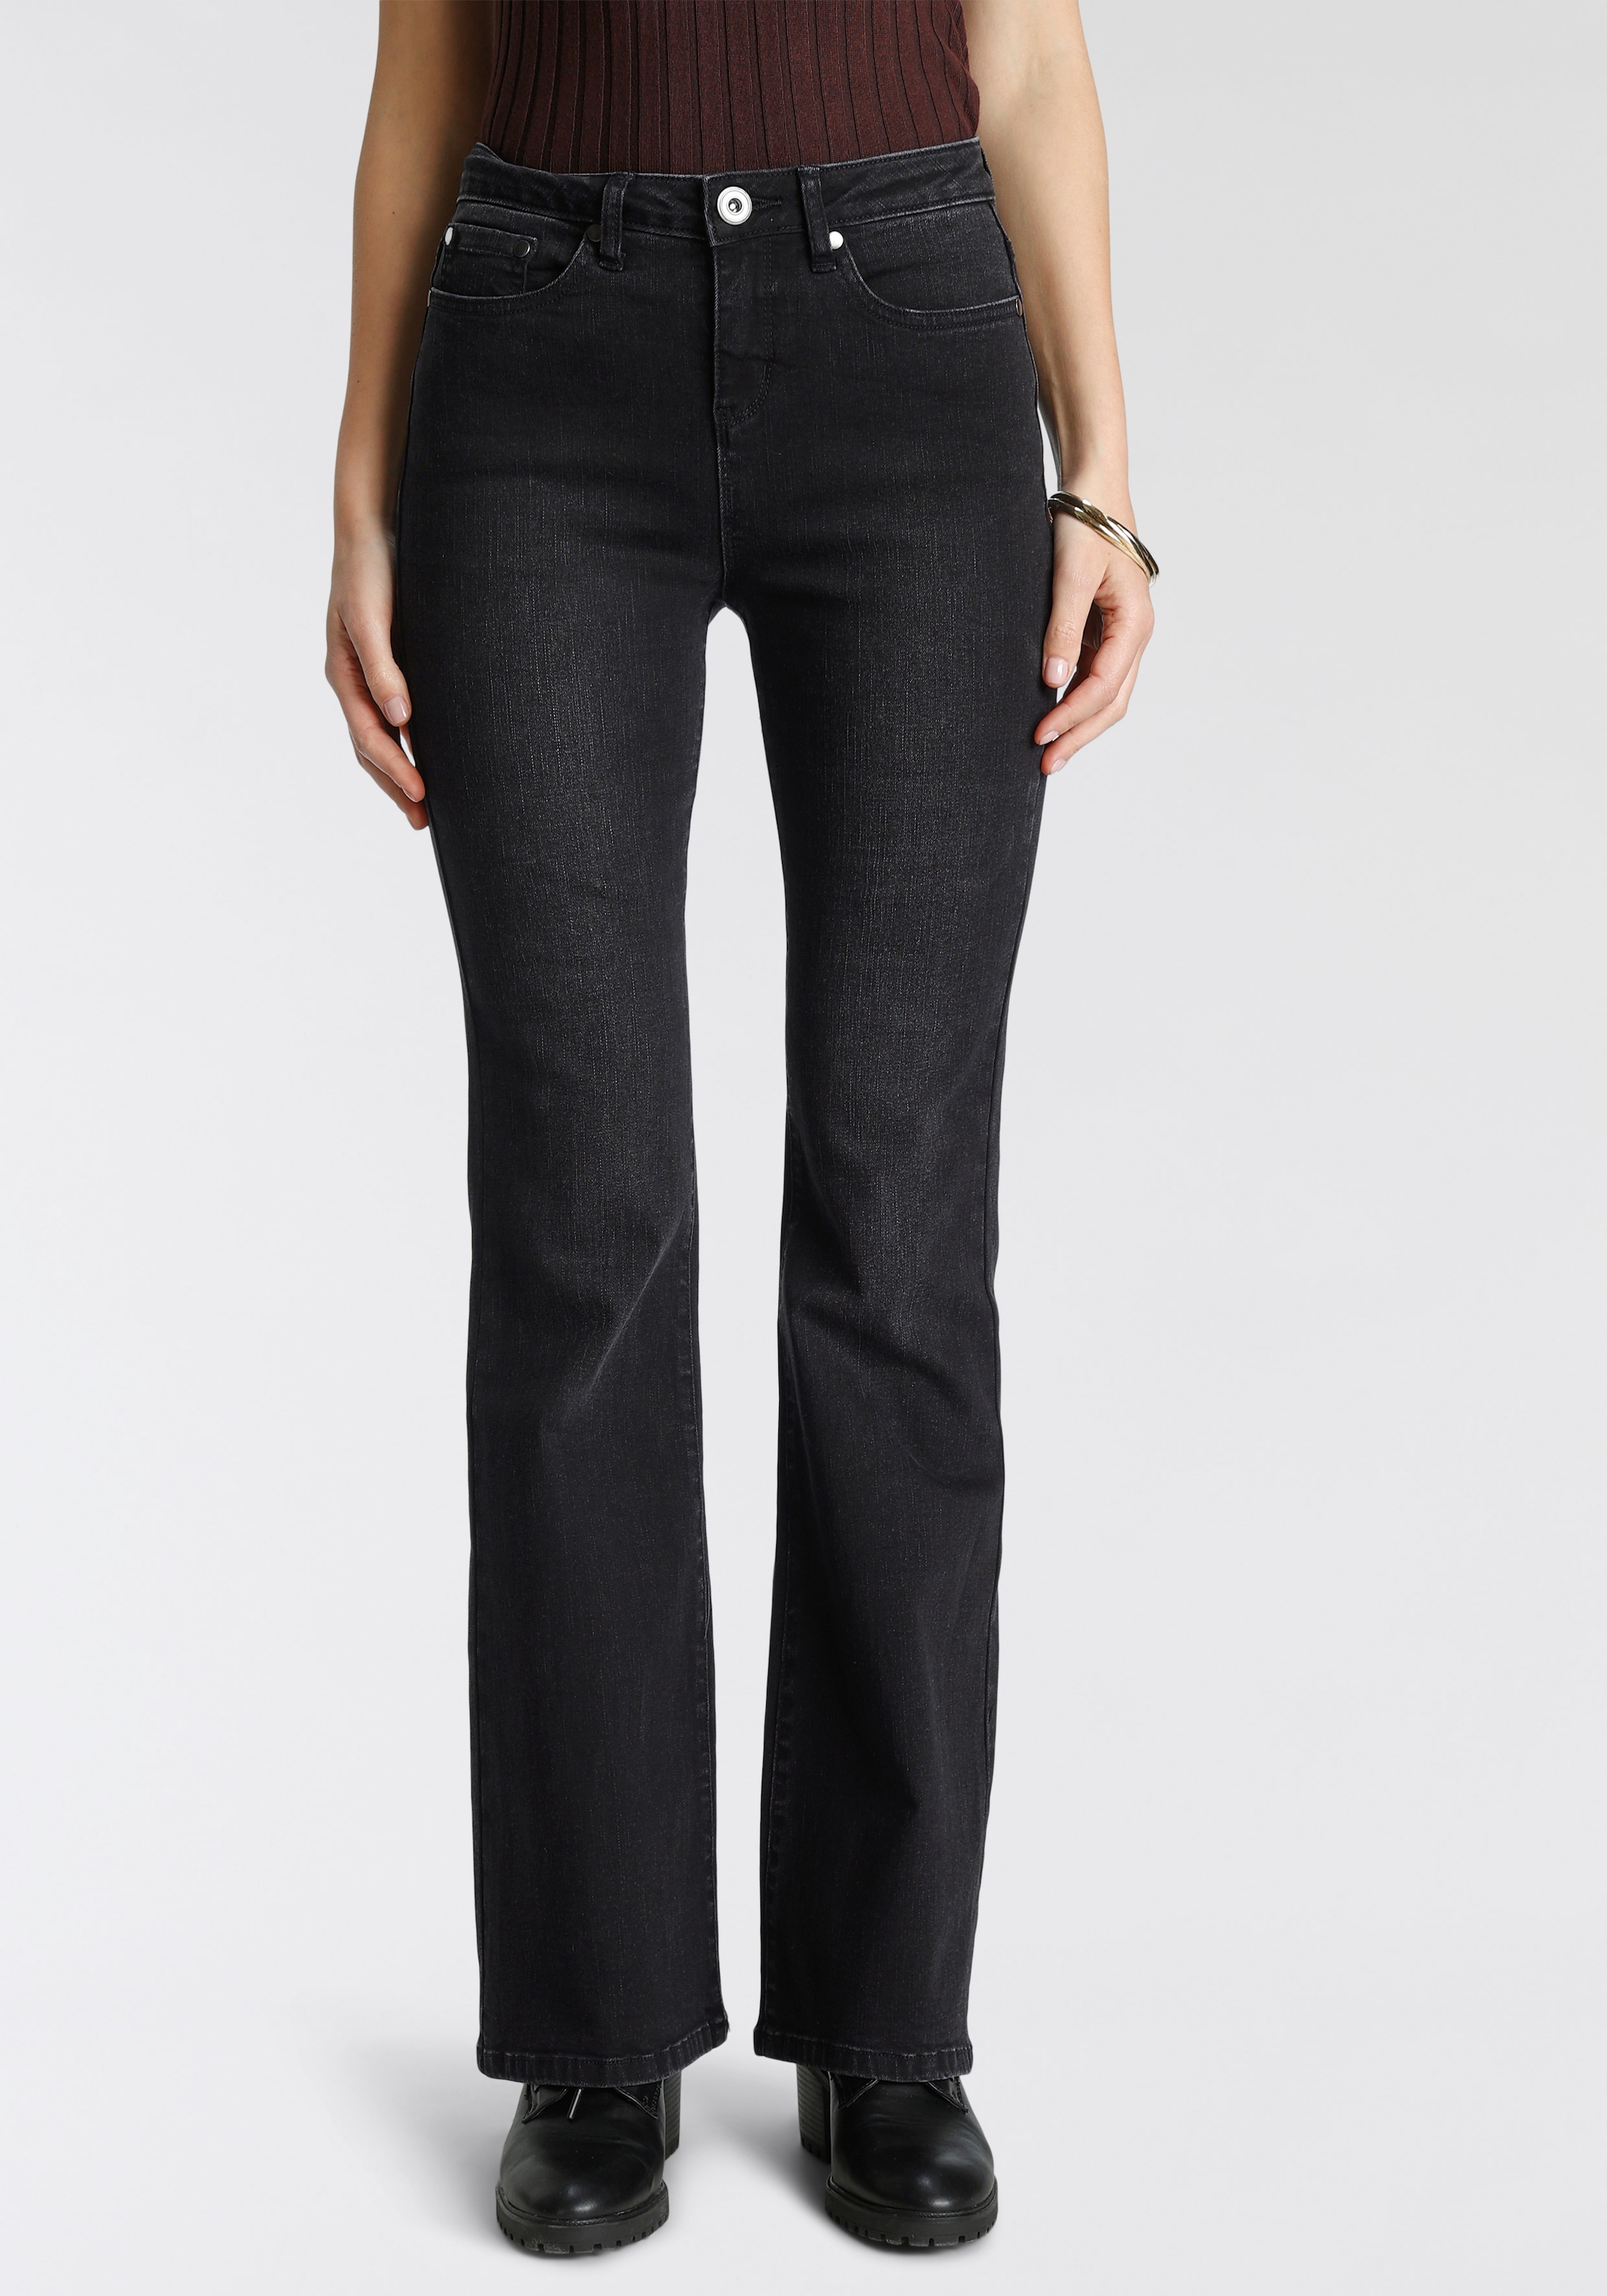 High-waist-Jeans, in Flared Form im 5-Pocket-Style